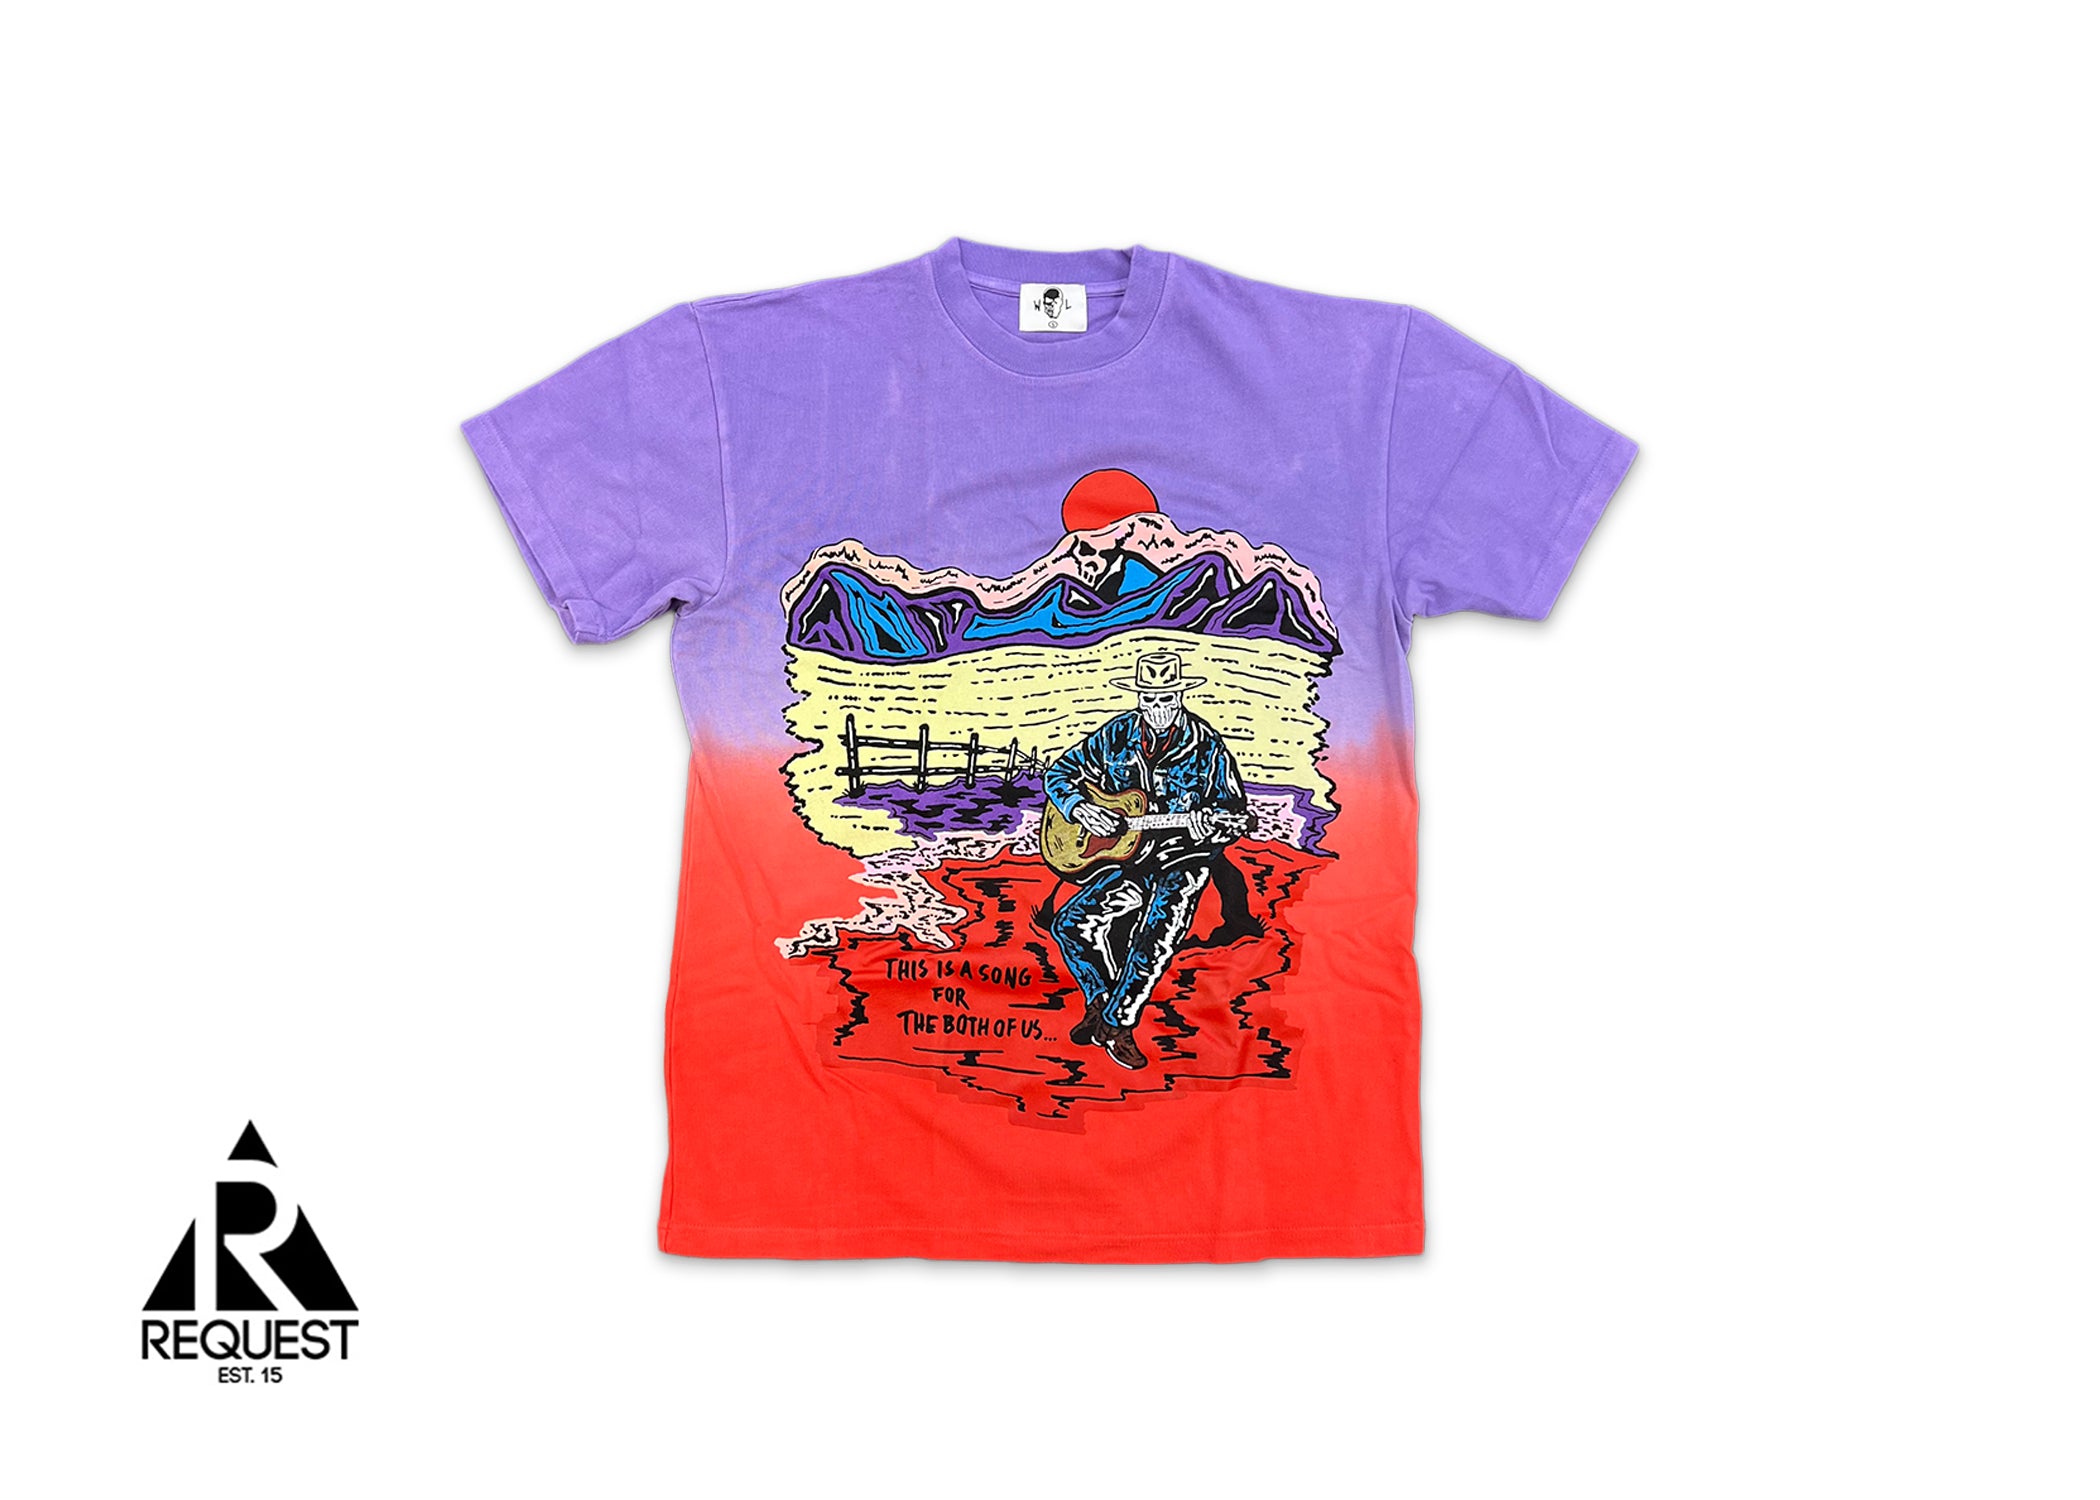 The Singer Tee "Ombre Dye"